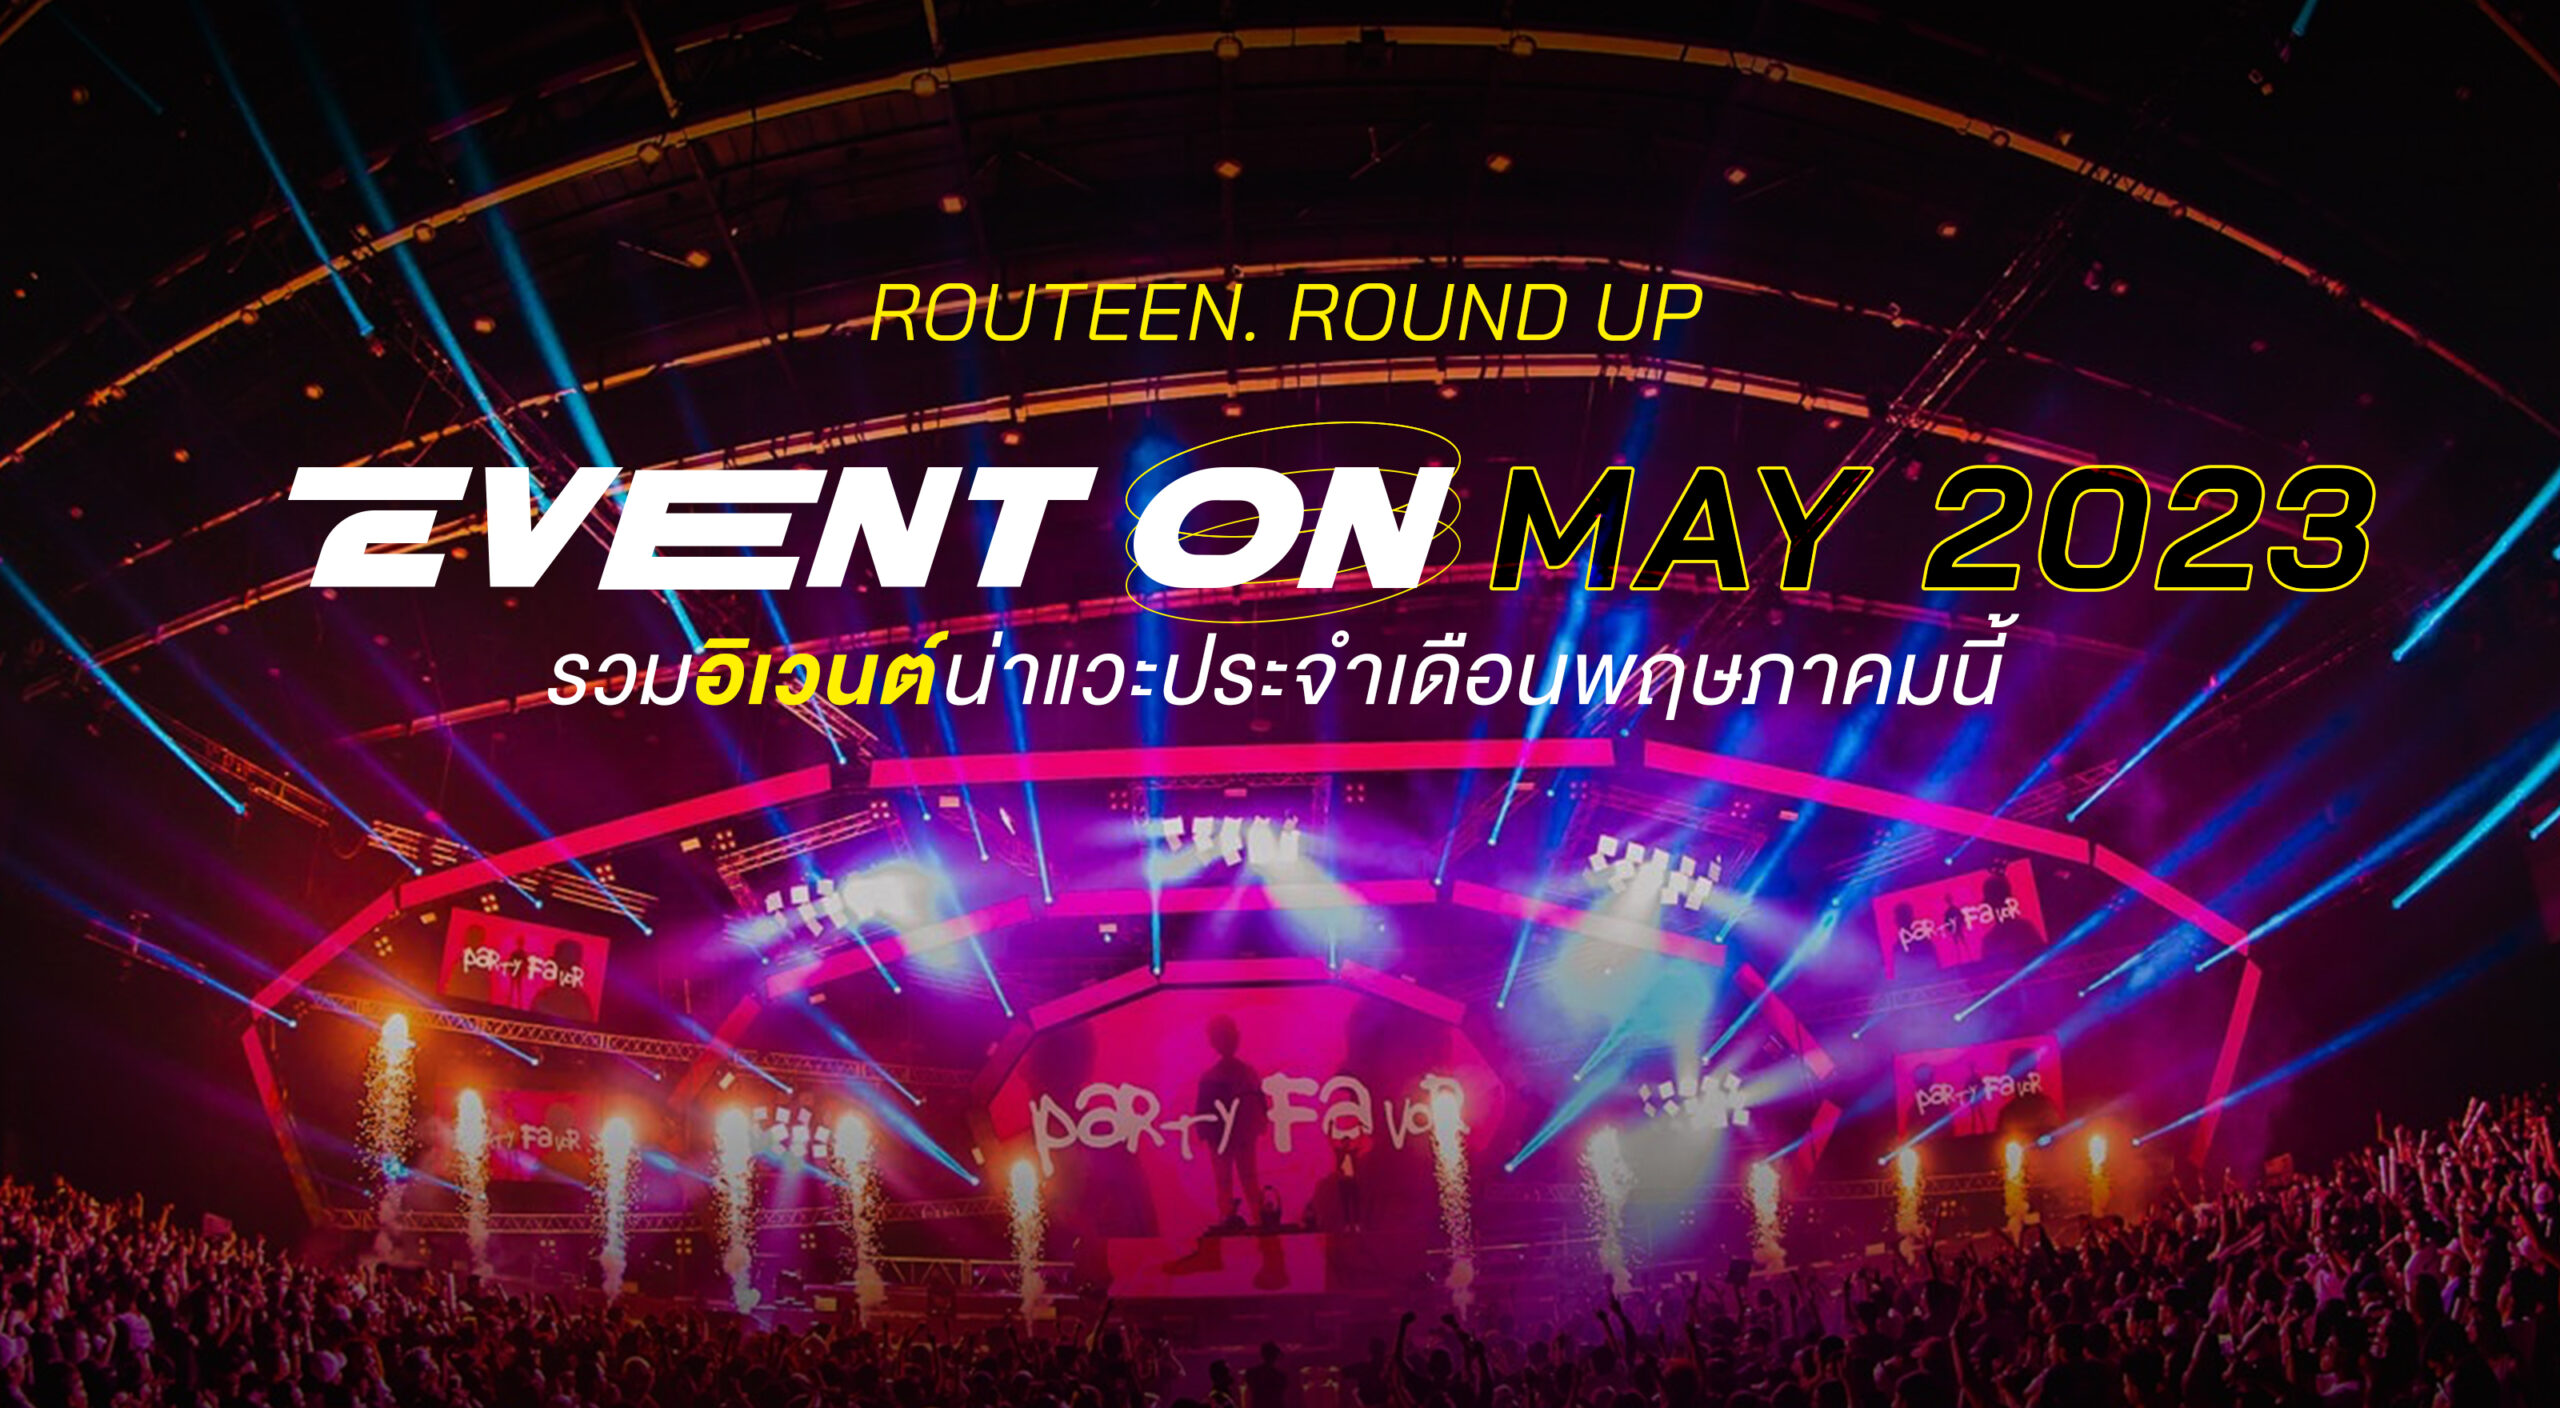 Routeen-round-up-events-may-2023